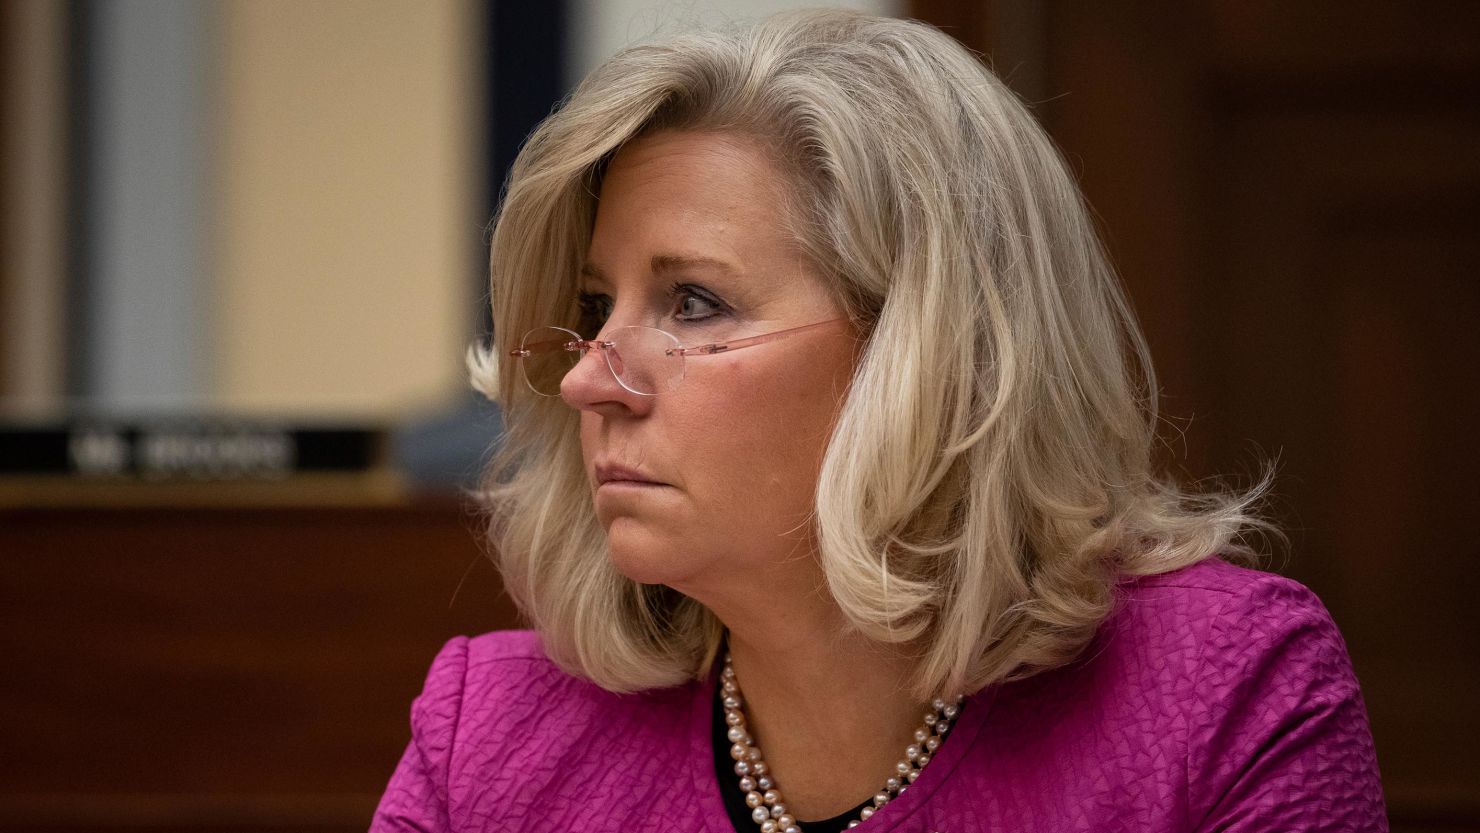 Rep. Liz Cheney, a Wyoming Republican, is seen last month during a House Armed Services Committee hearing at the US Capitol in Washington, D.C.